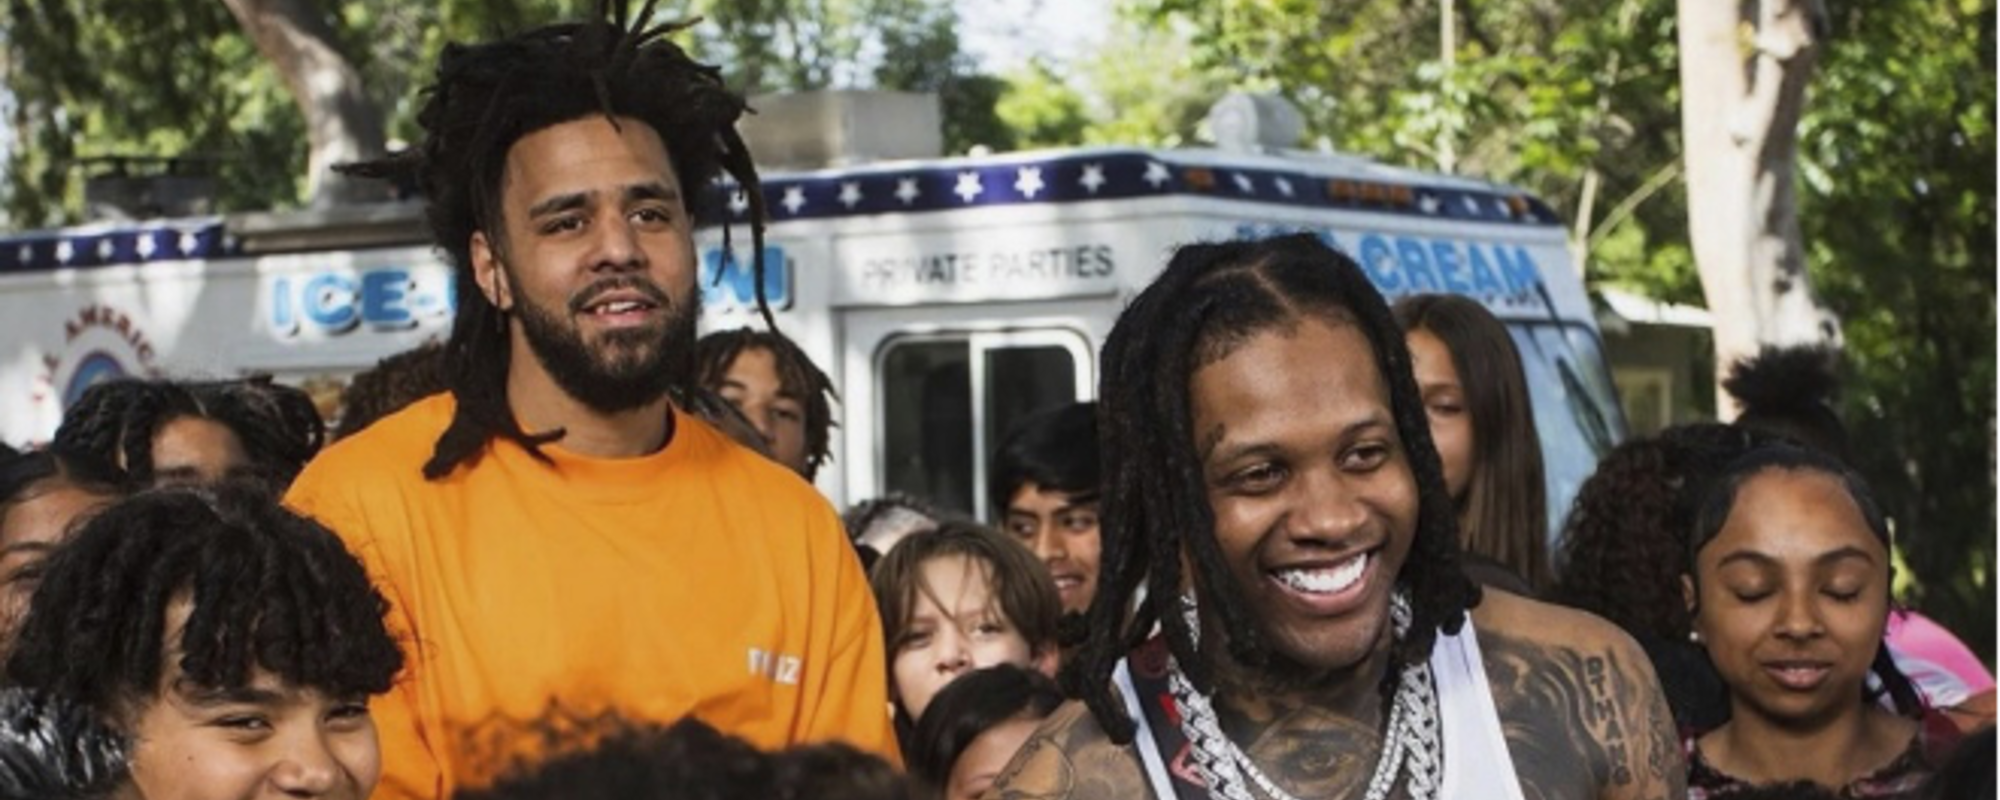 Watch: Lil Durk and J. Cole Perform “All My Life” for the First Time